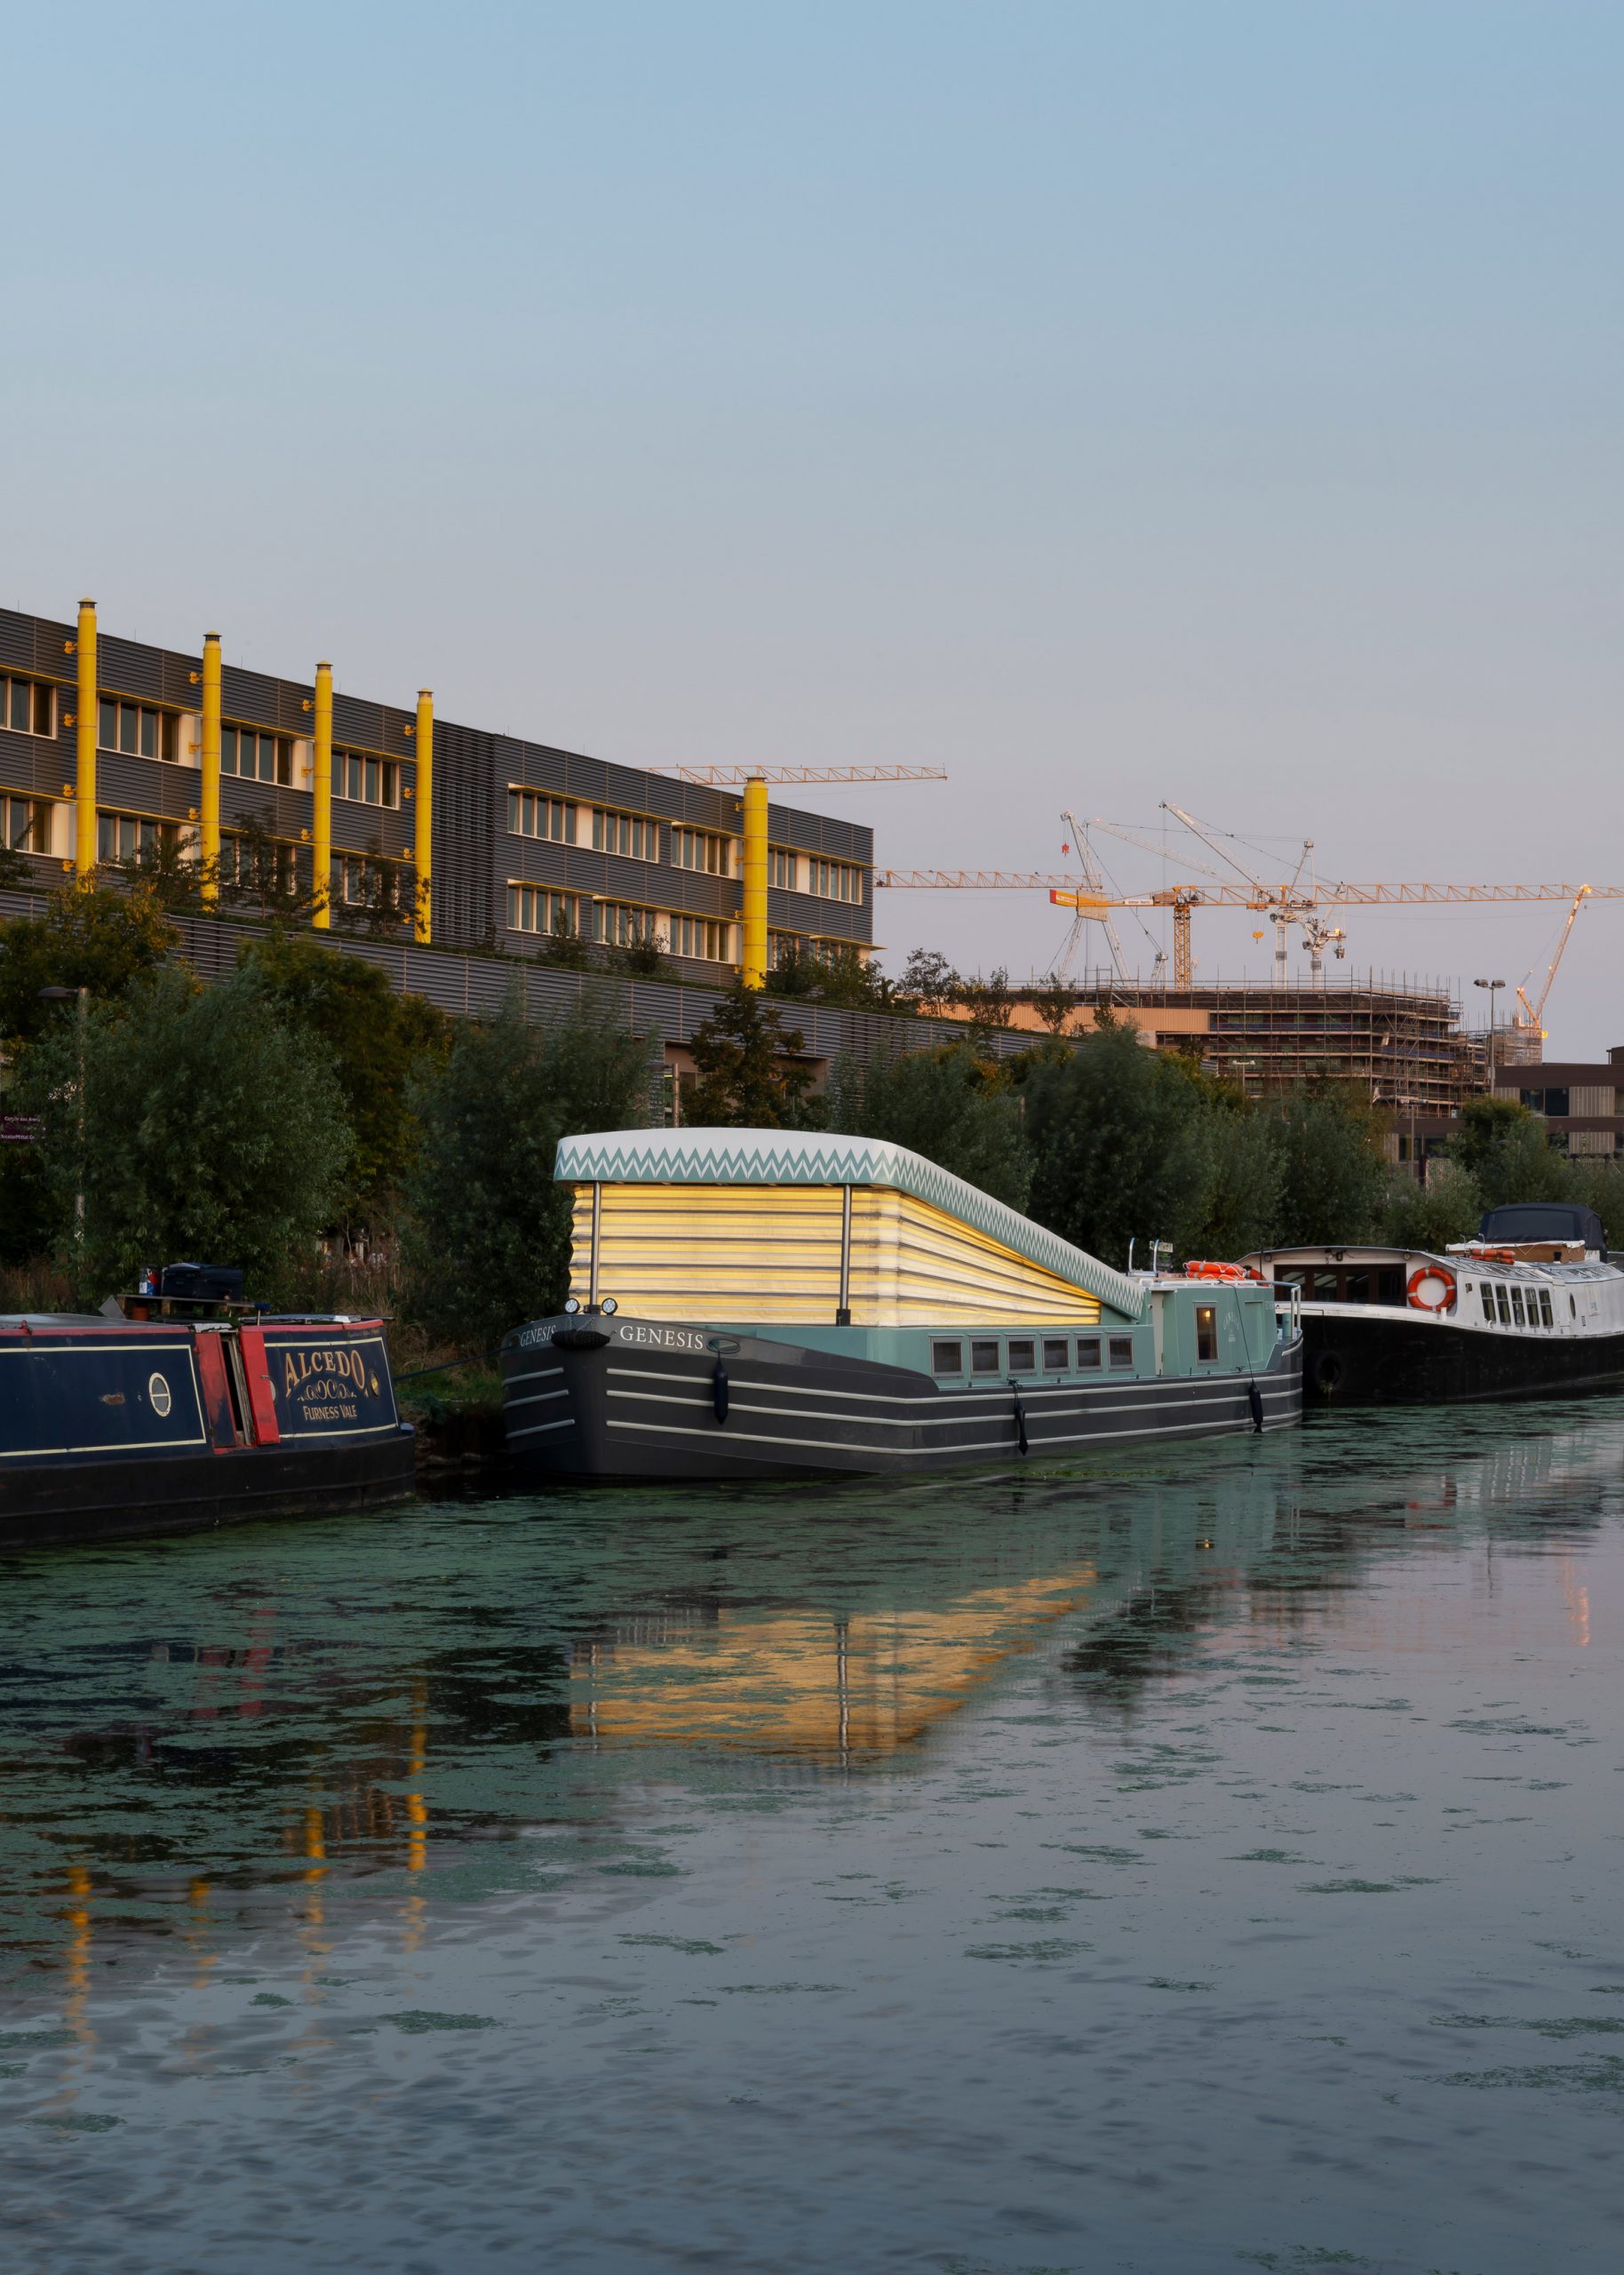 Exterior of the floating Genesis church by Denizen Works in east London